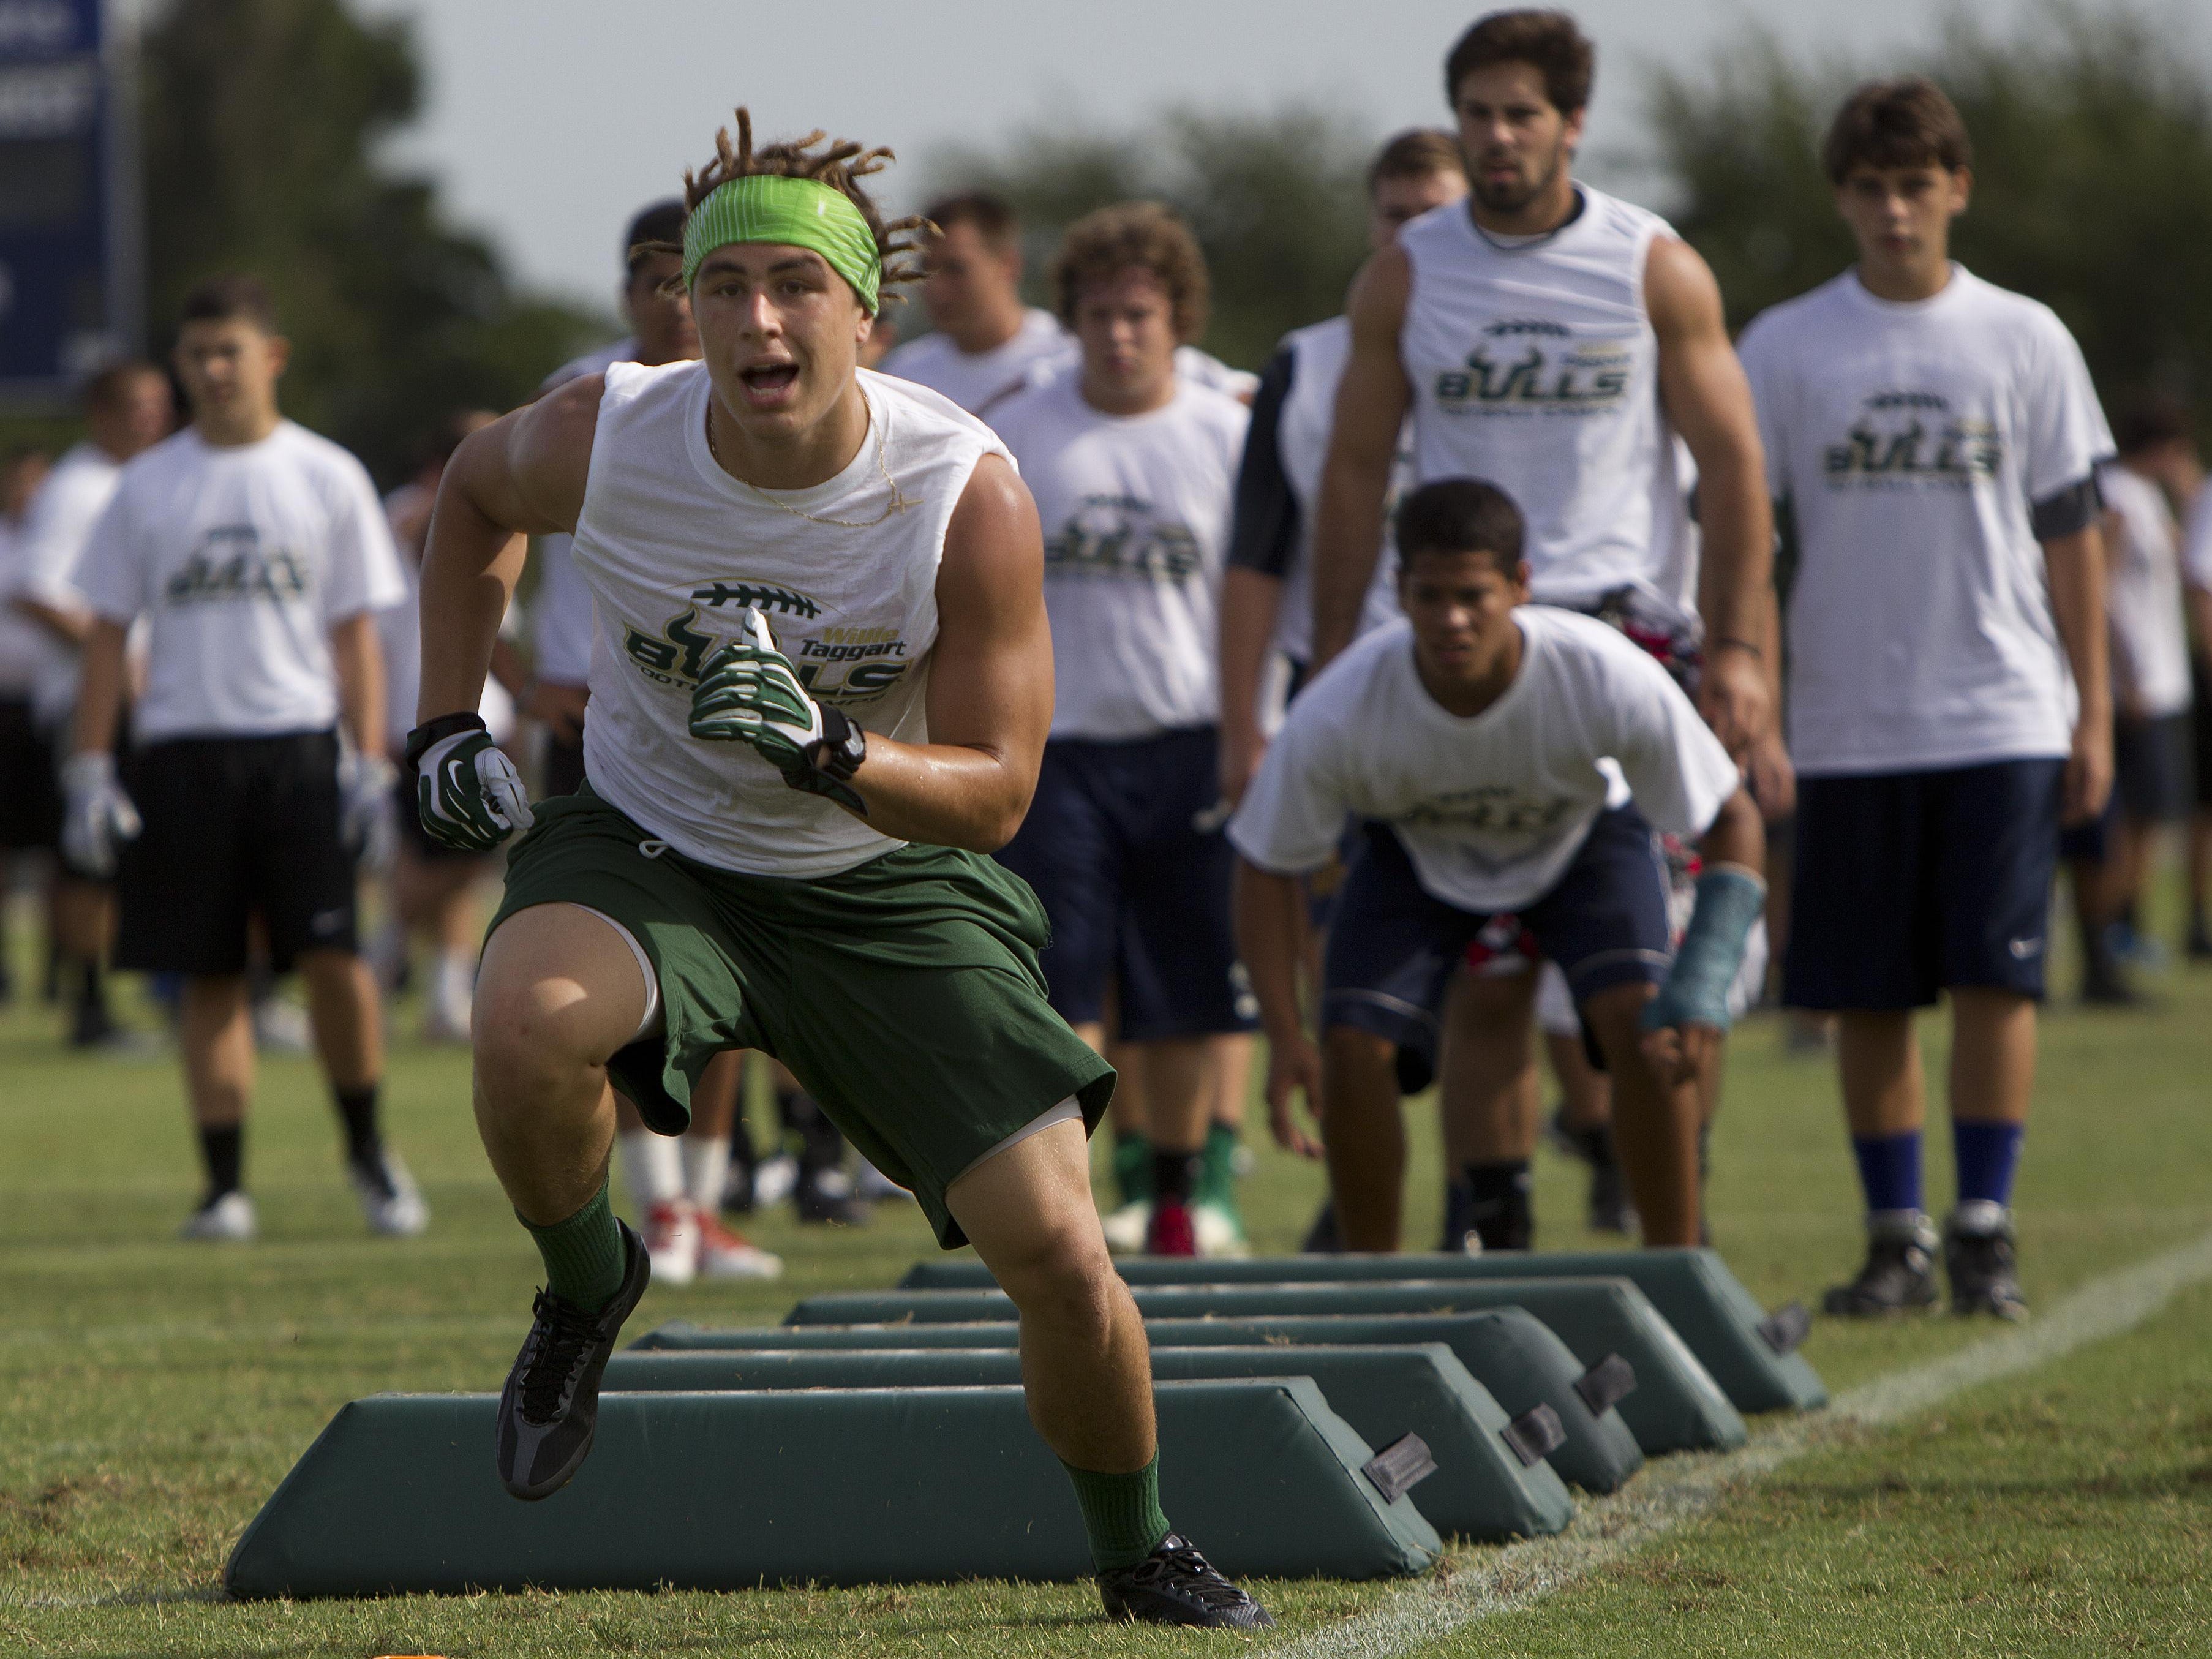 Players run through drills last year at the USF football camp at Estero High School. On Thursday, the camp moves to North Fort Myers, where the Bullls will hold their third straight camp in Southwest Florida.